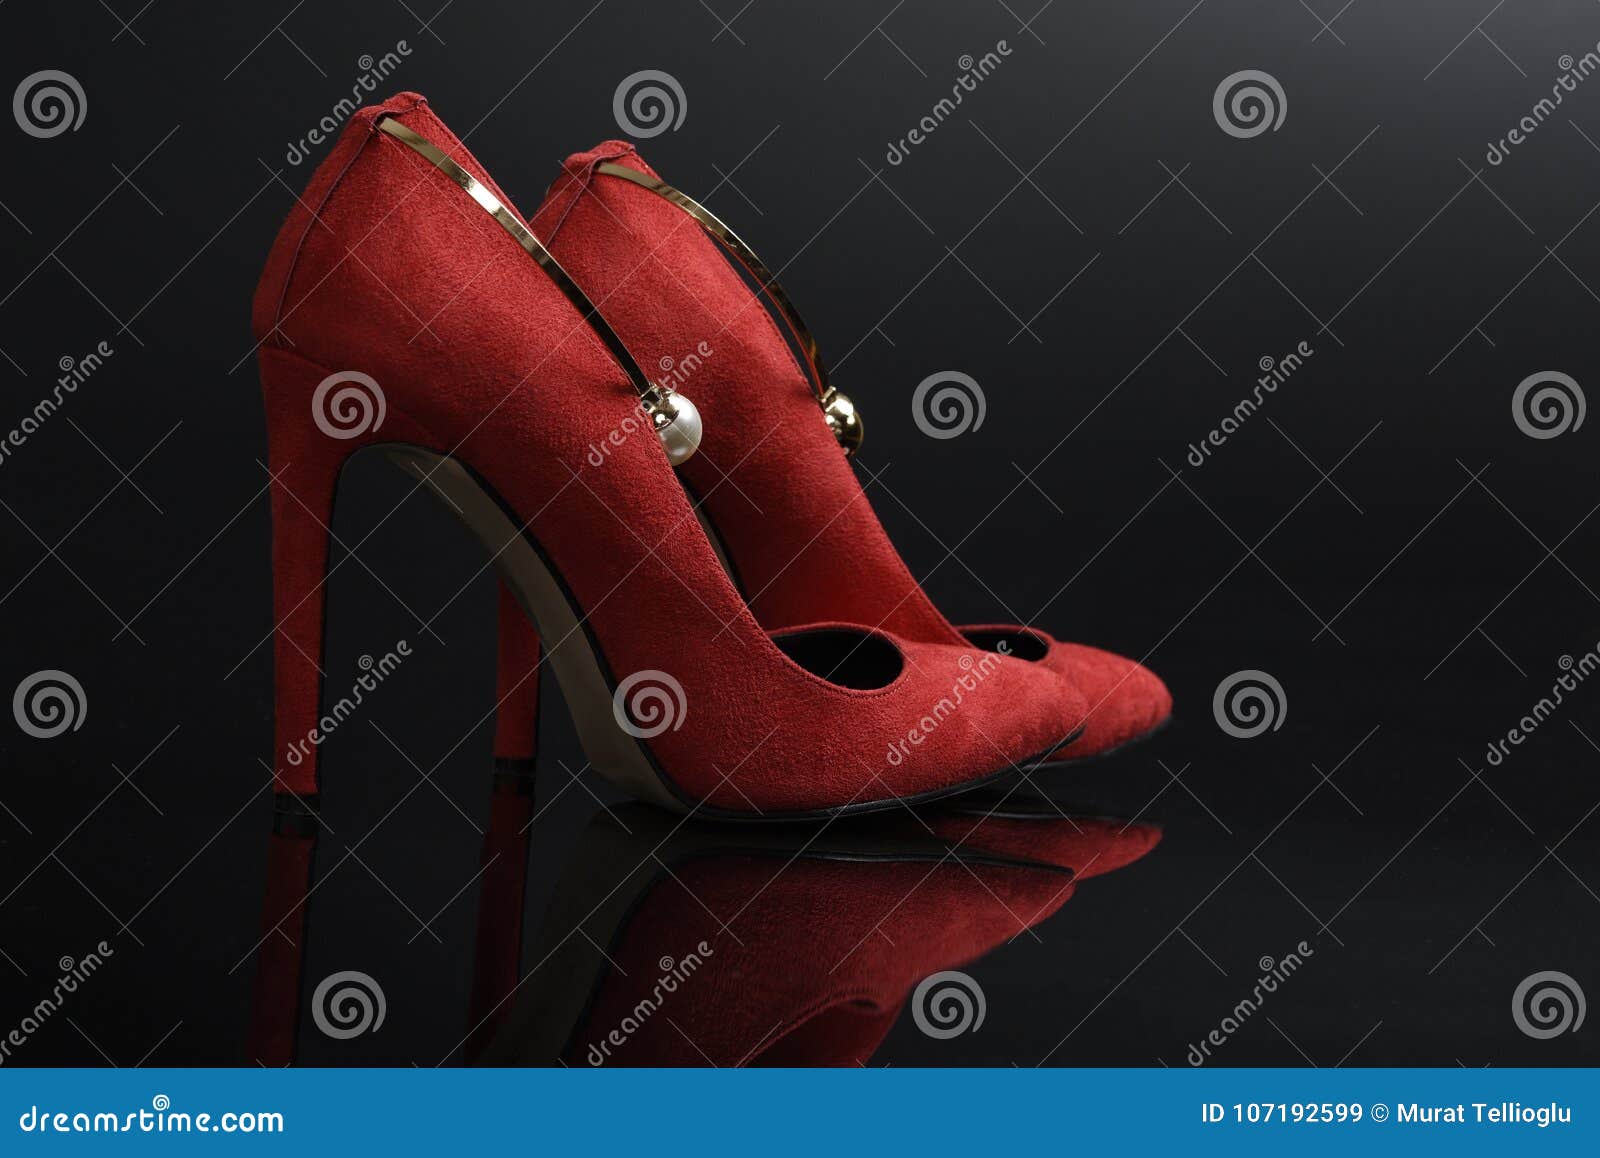 Modern Red High Heels Shoes Stock Image - Image of elegant, lifestyle ...